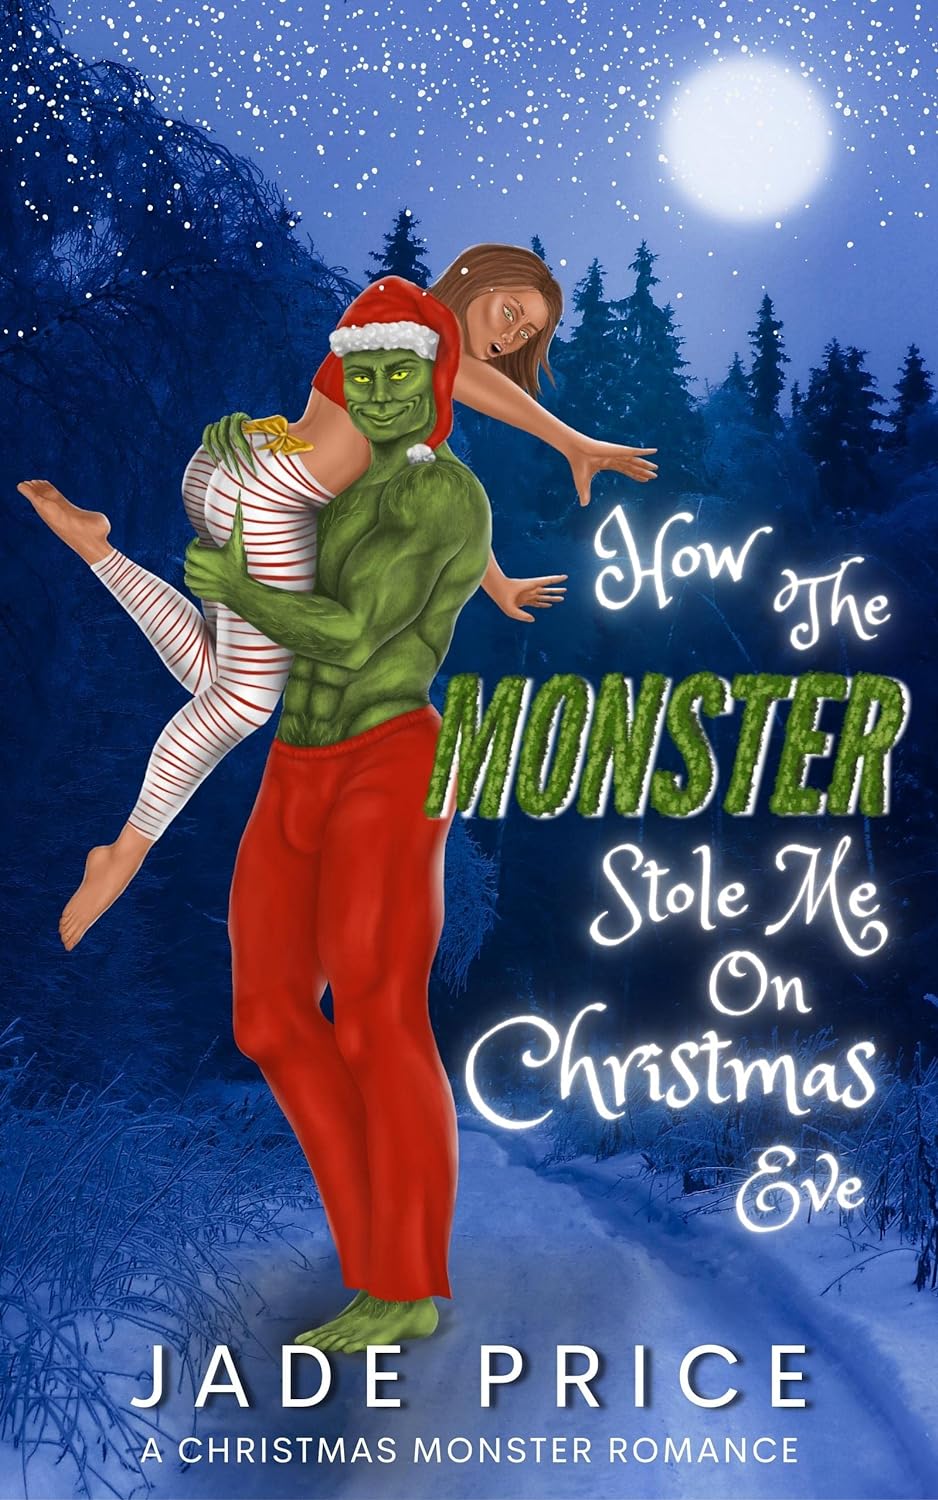 How the Monster Stole Me on Christmas Eve by Jade Price